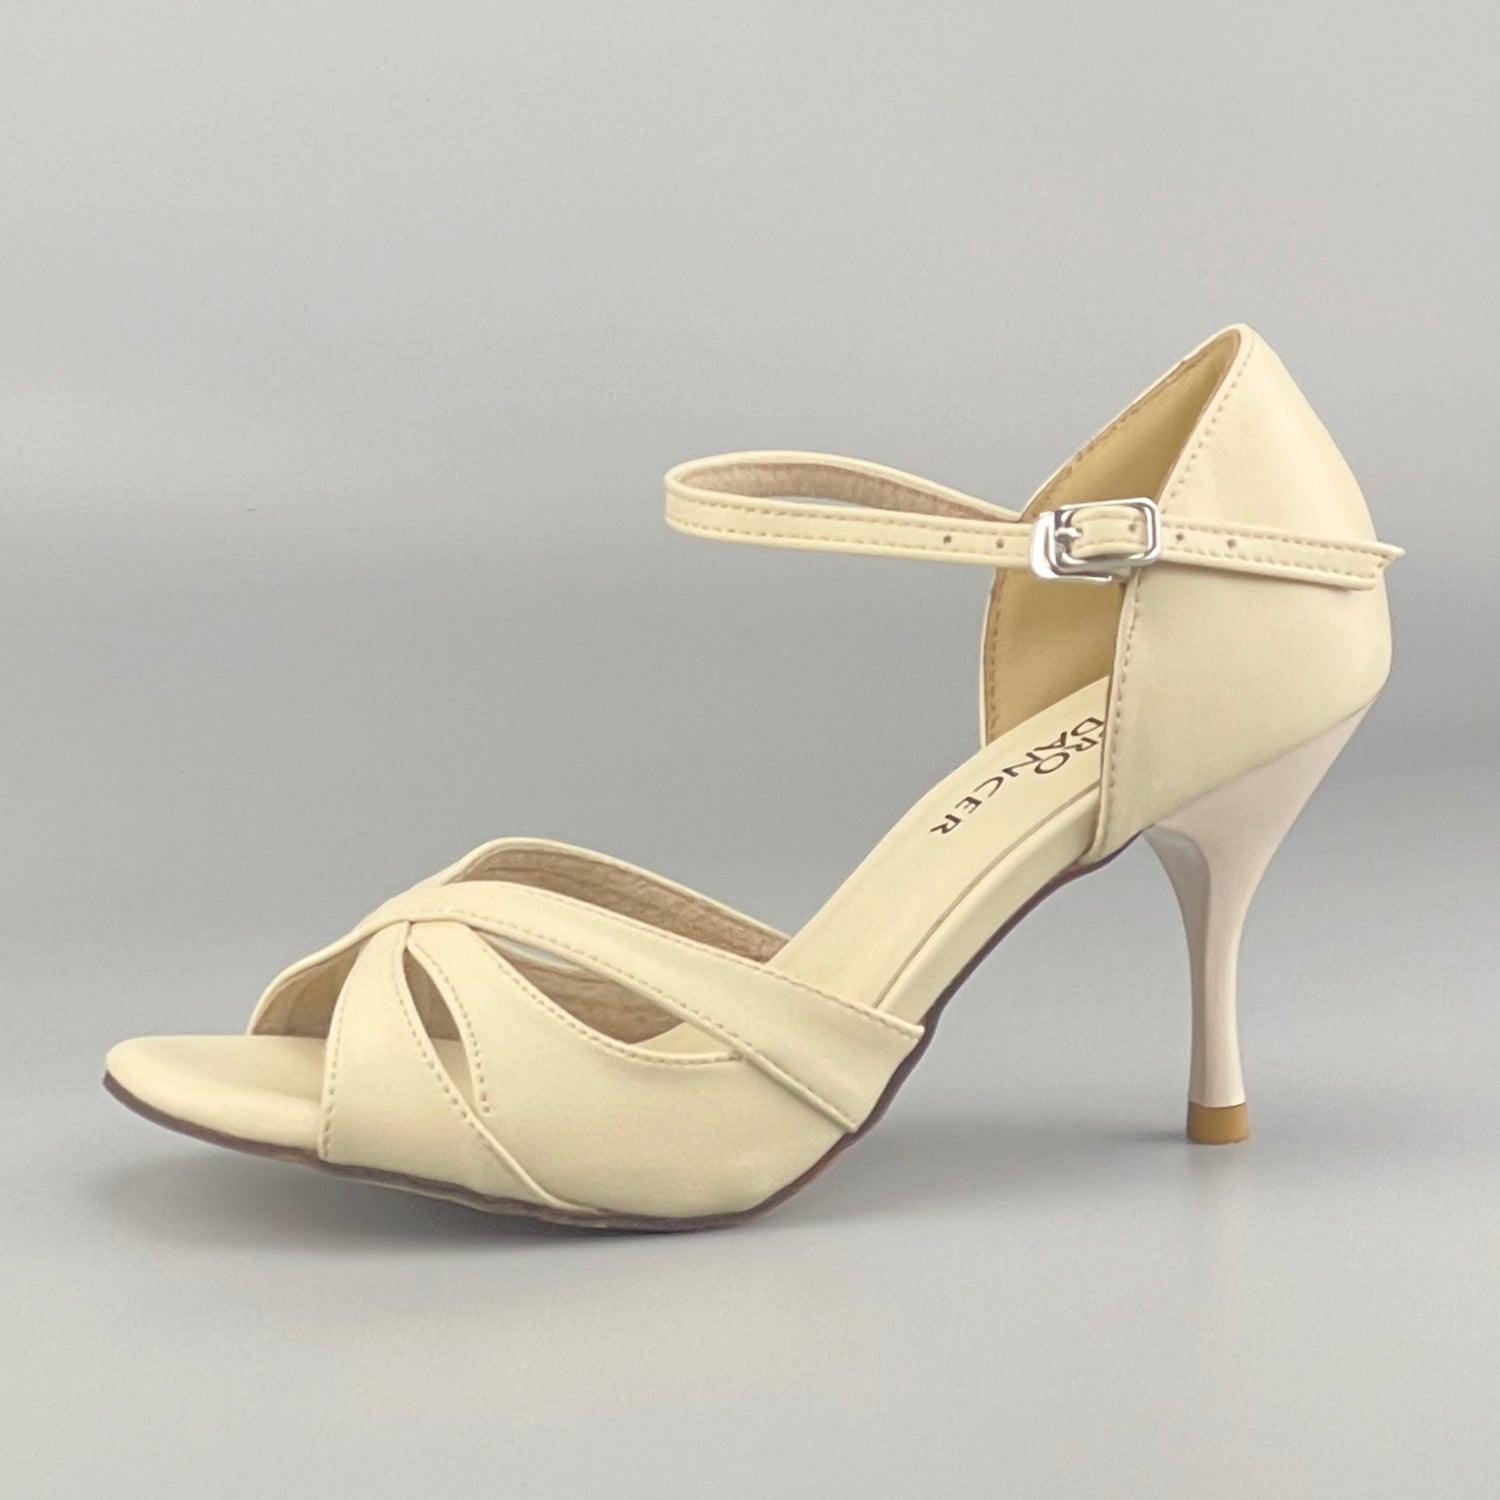 Pro Dancer Tango Argentino Shoes high heel dance sandals with leather sole in beige color (PD-9061A)3